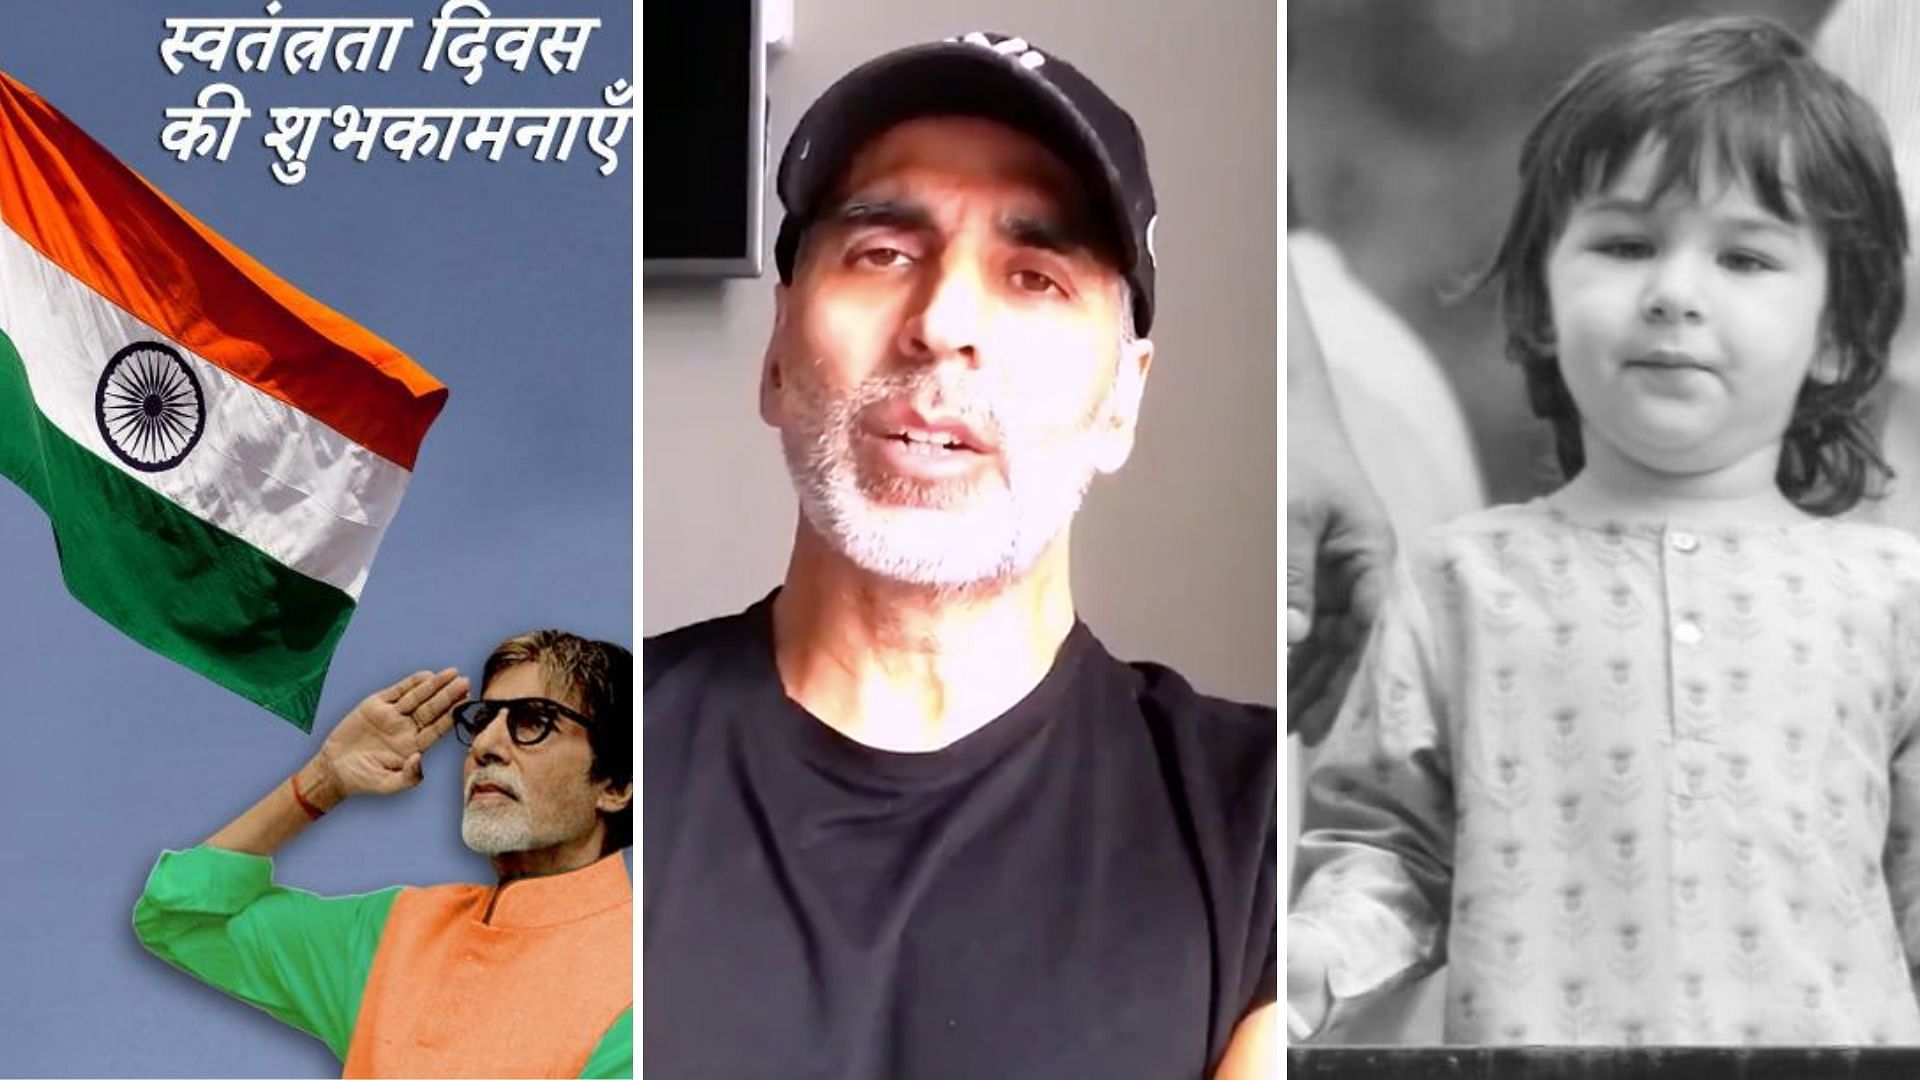 Celebs salute warriors fighting for our country on Independence Day